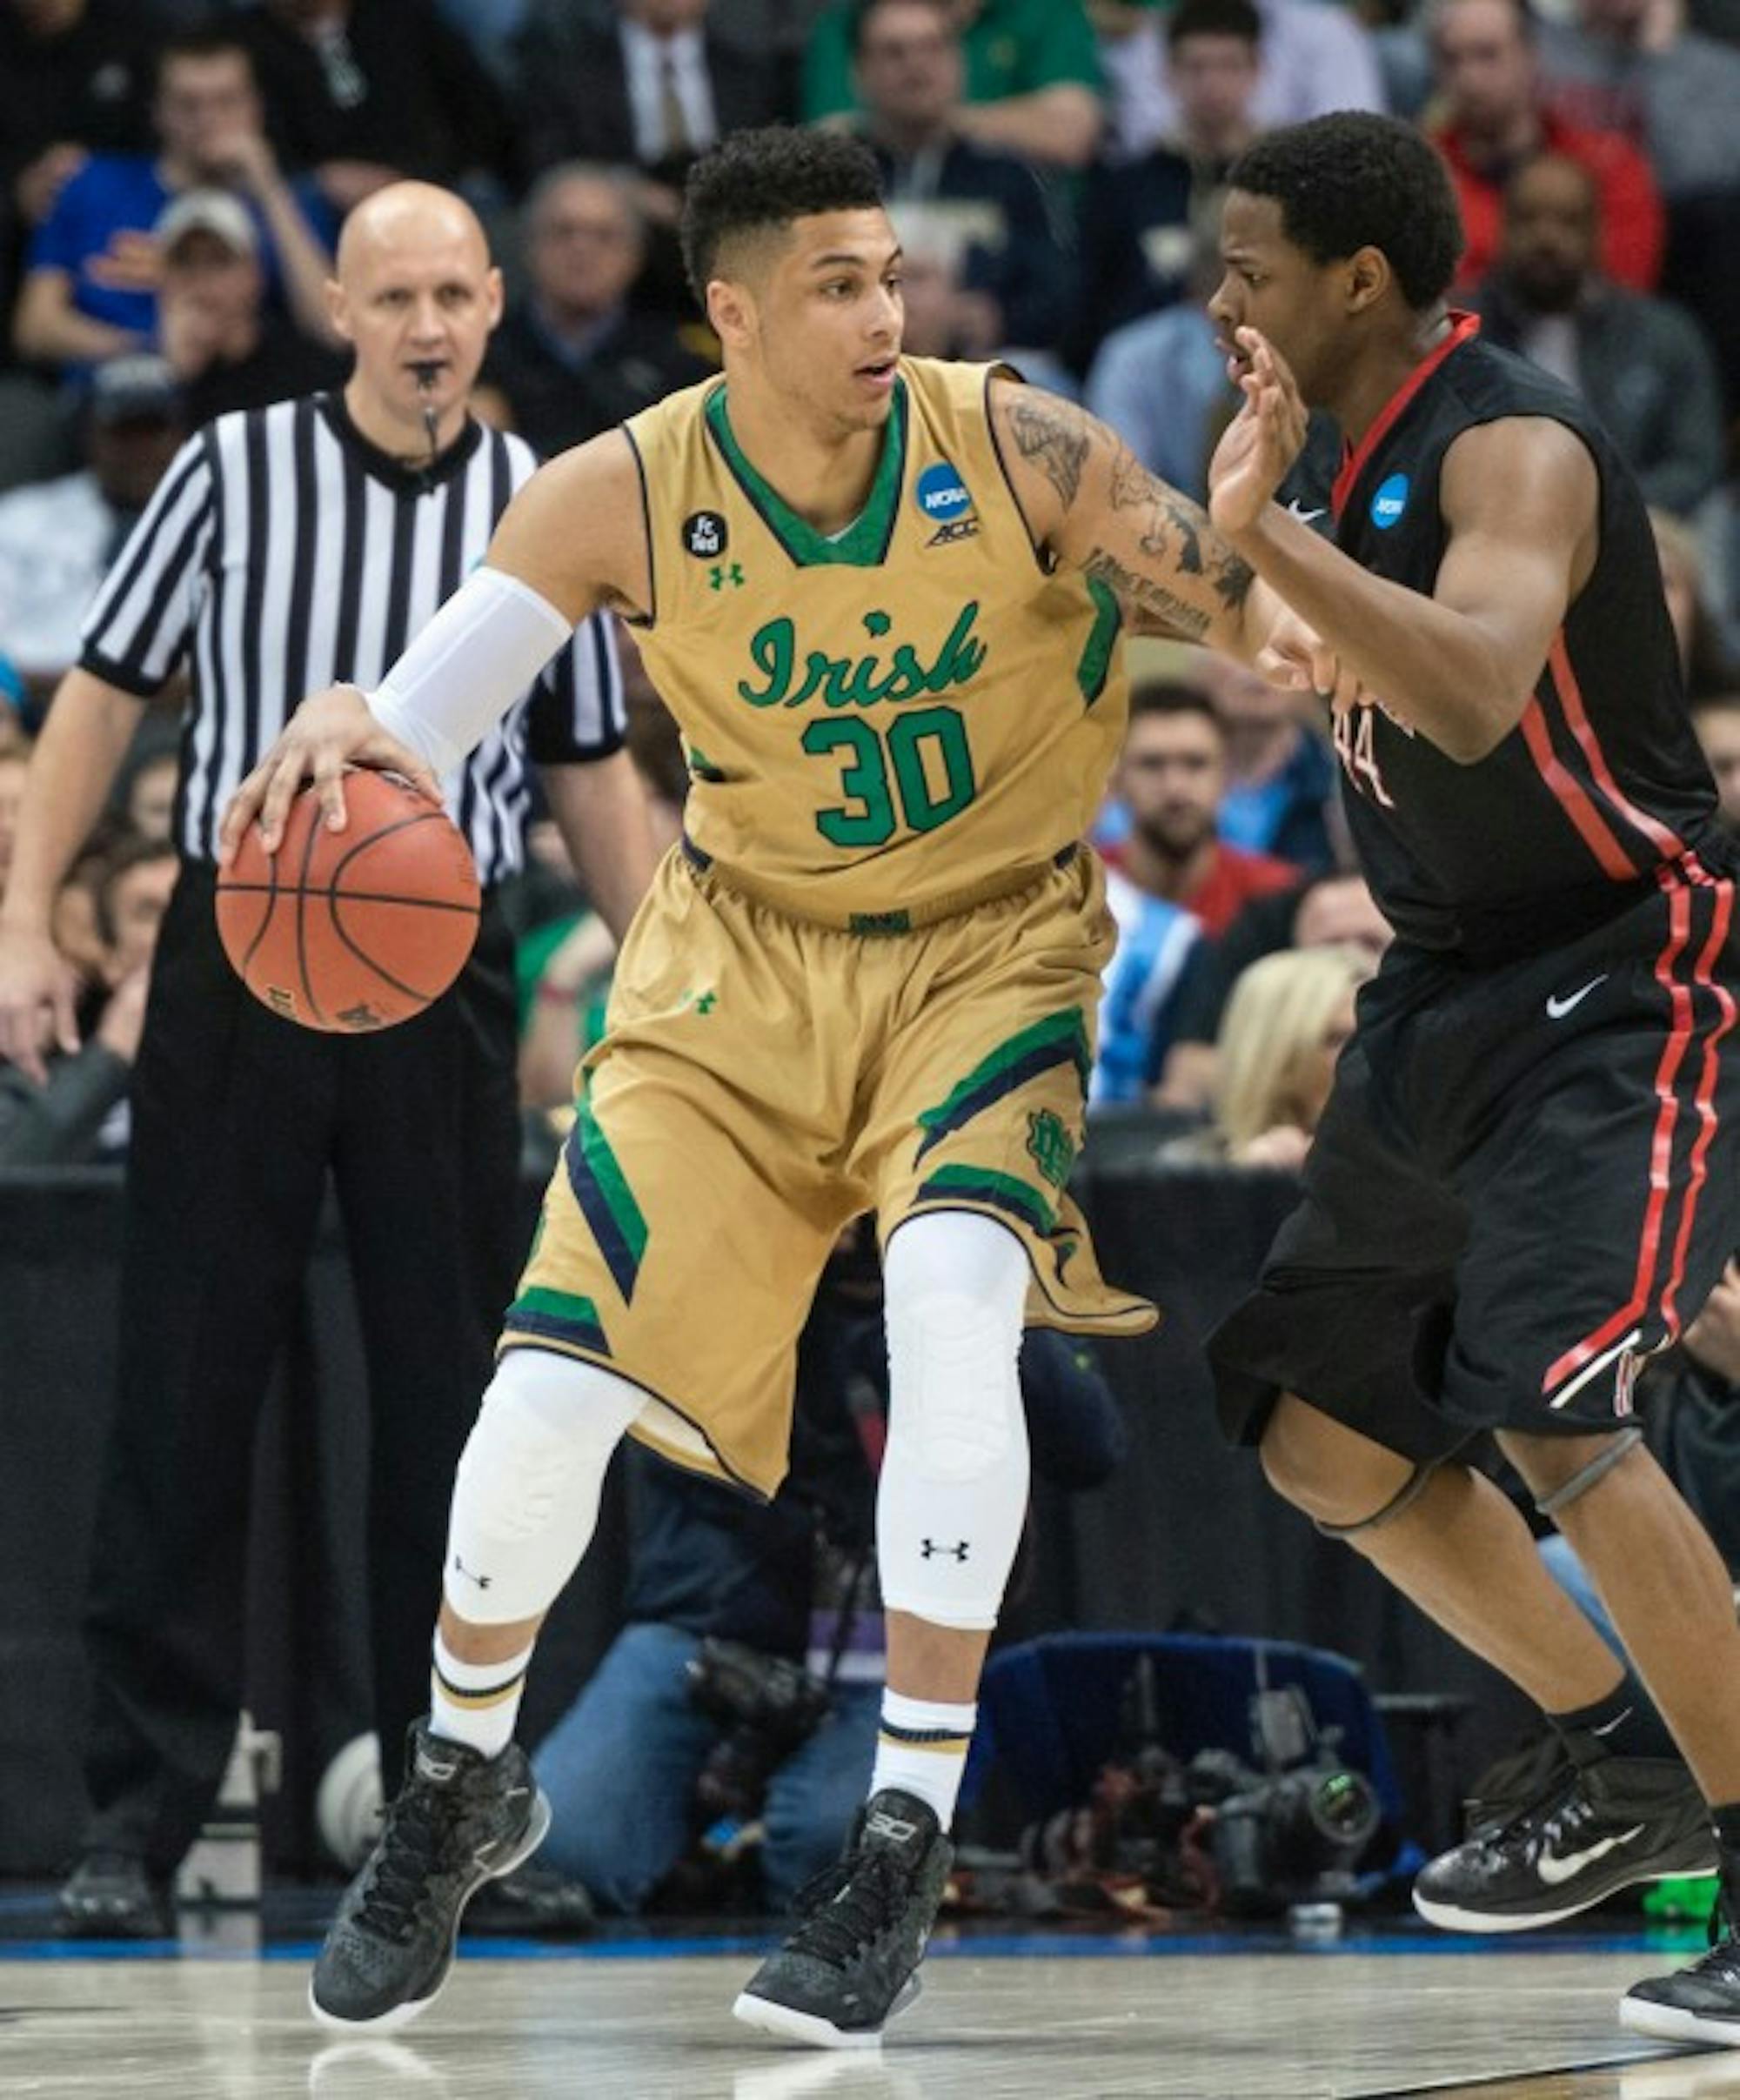 Irish senior forward Zach Auguste backs down his defender and surveys the court during Notre Dame’s  69-65 win over Northeastern on March 19 at CONSOL Energy Center.